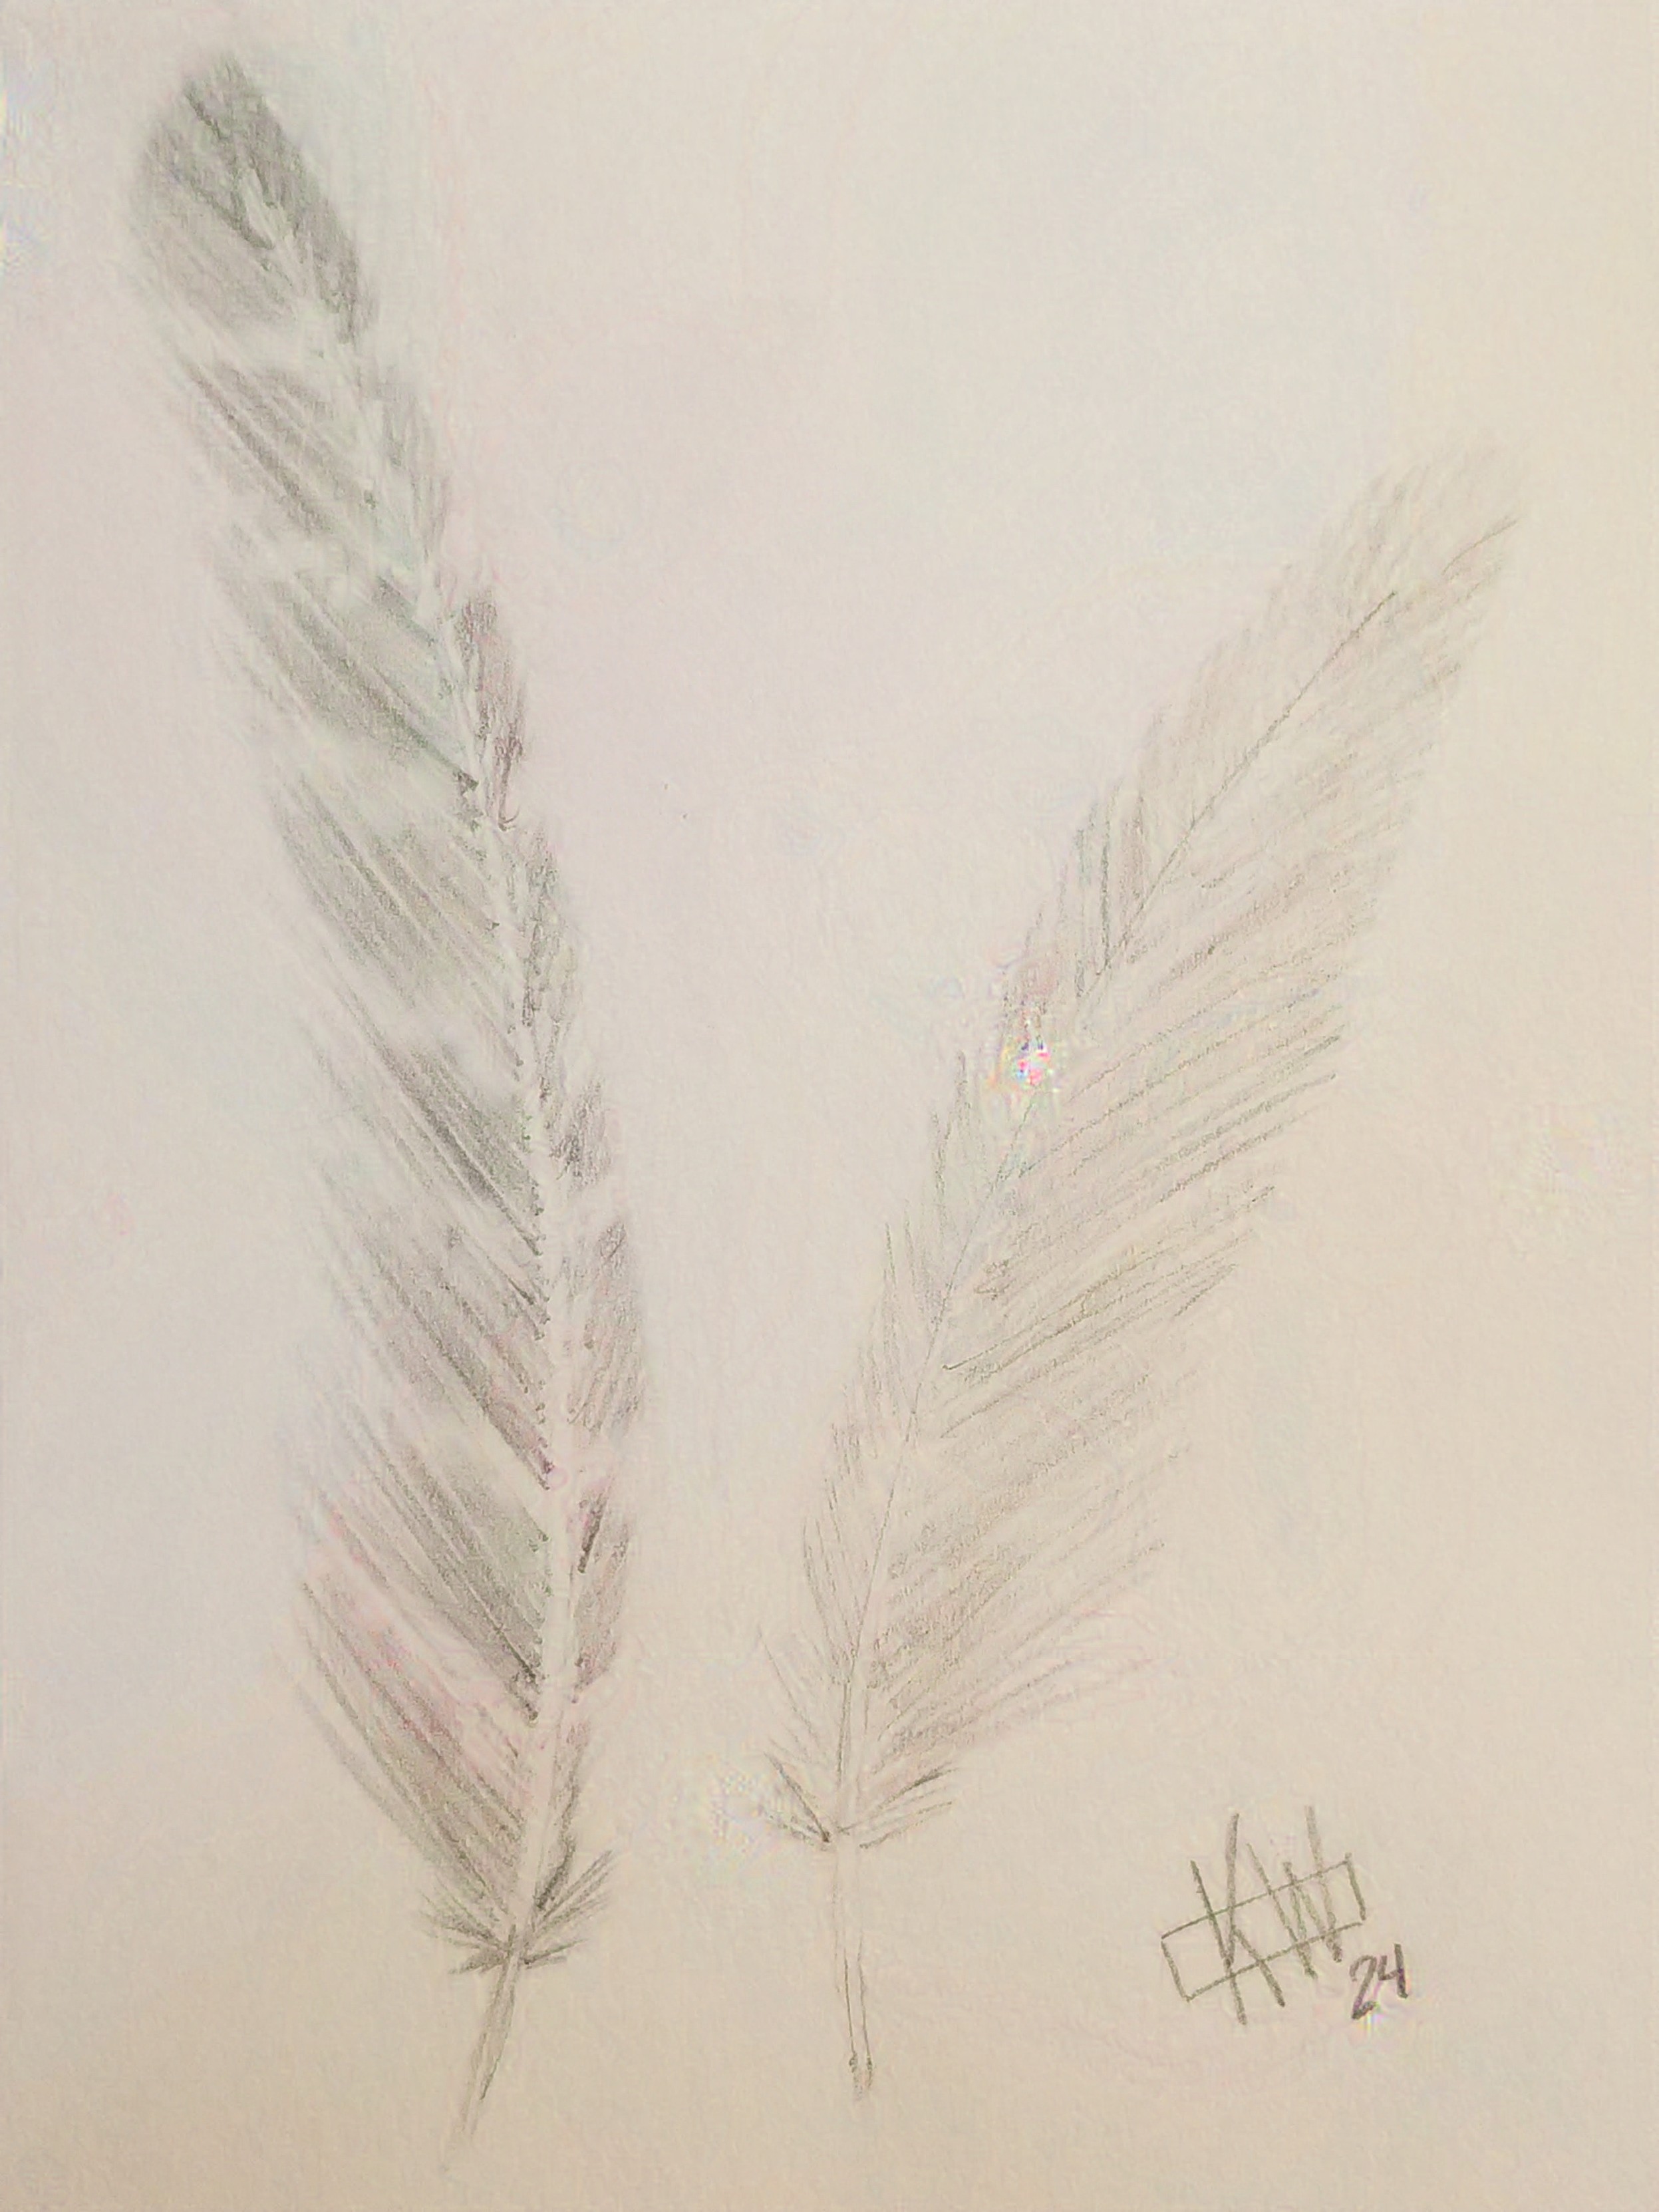 Pencil sketches of 2 long feathers.